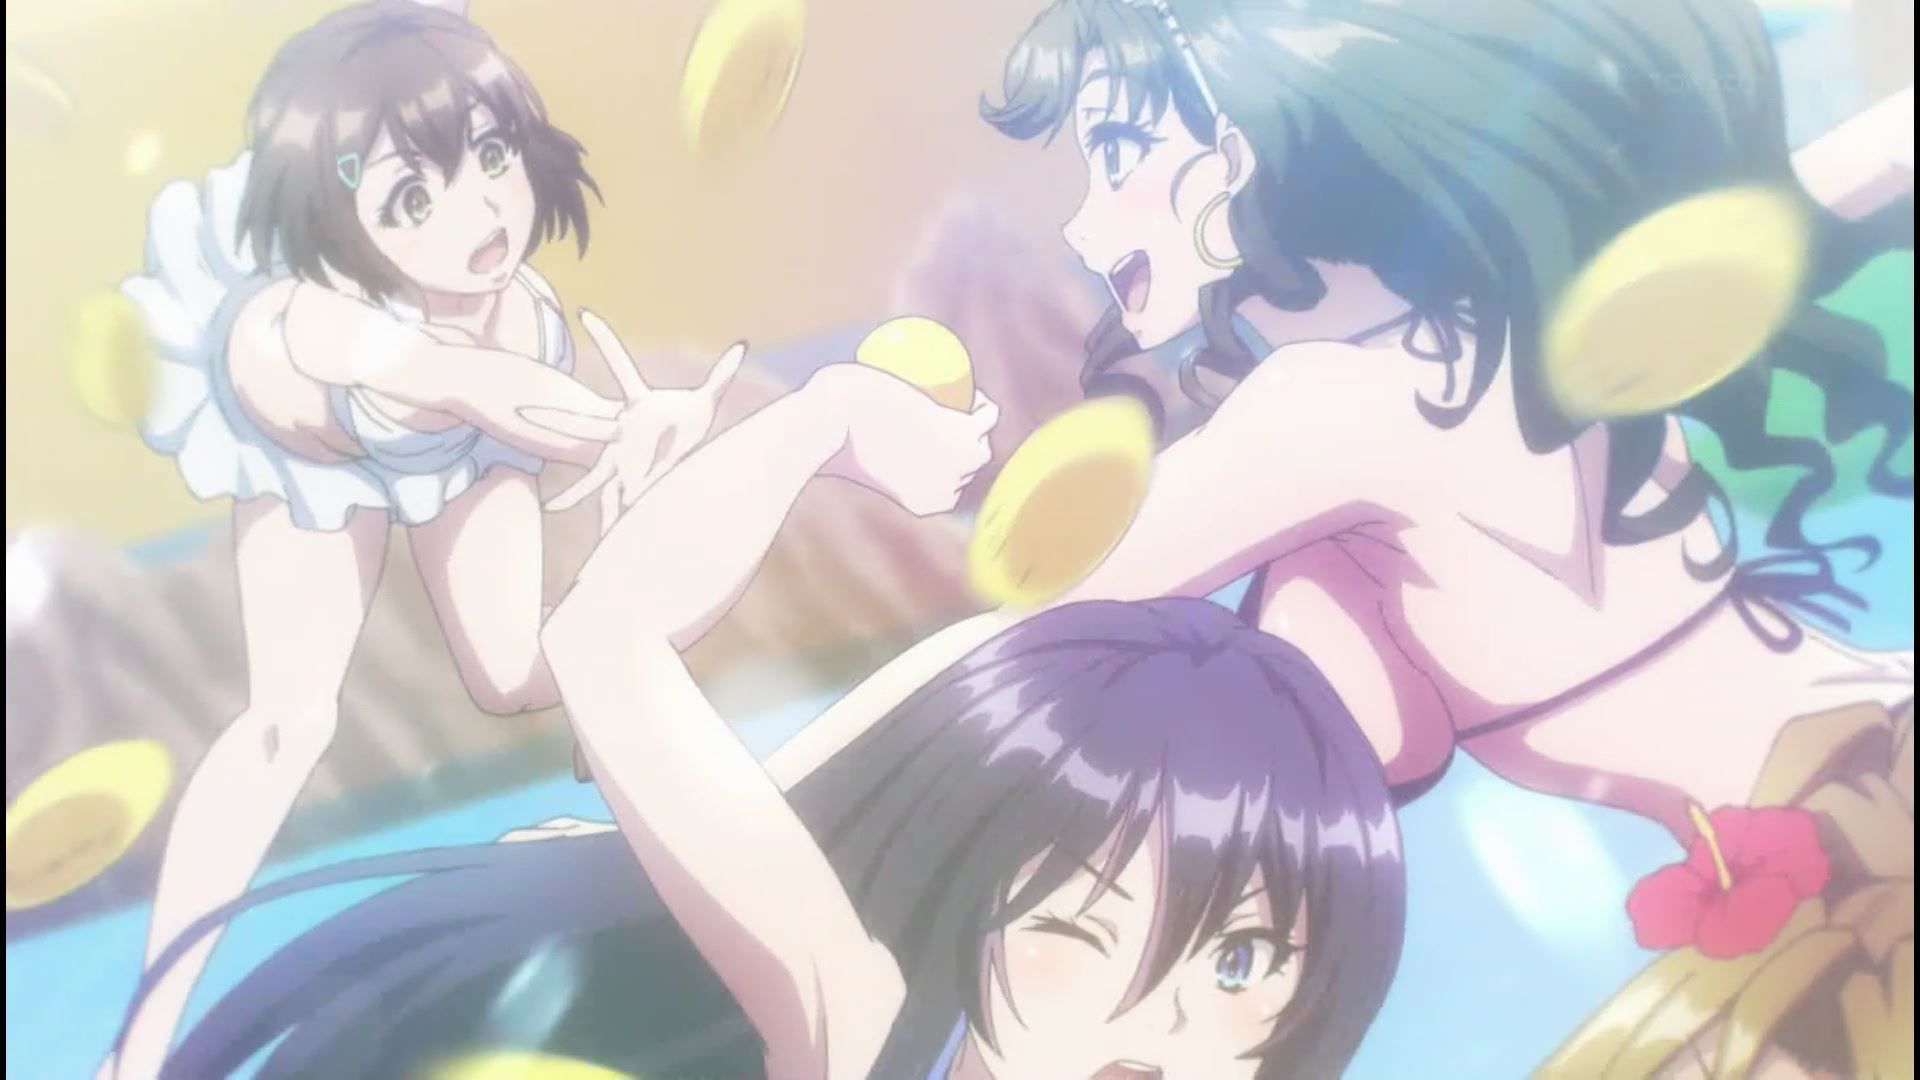 Anime [Kandagawa JETGIRLS] 6 episodes, such as girls' very cute swimsuit and naked! 27